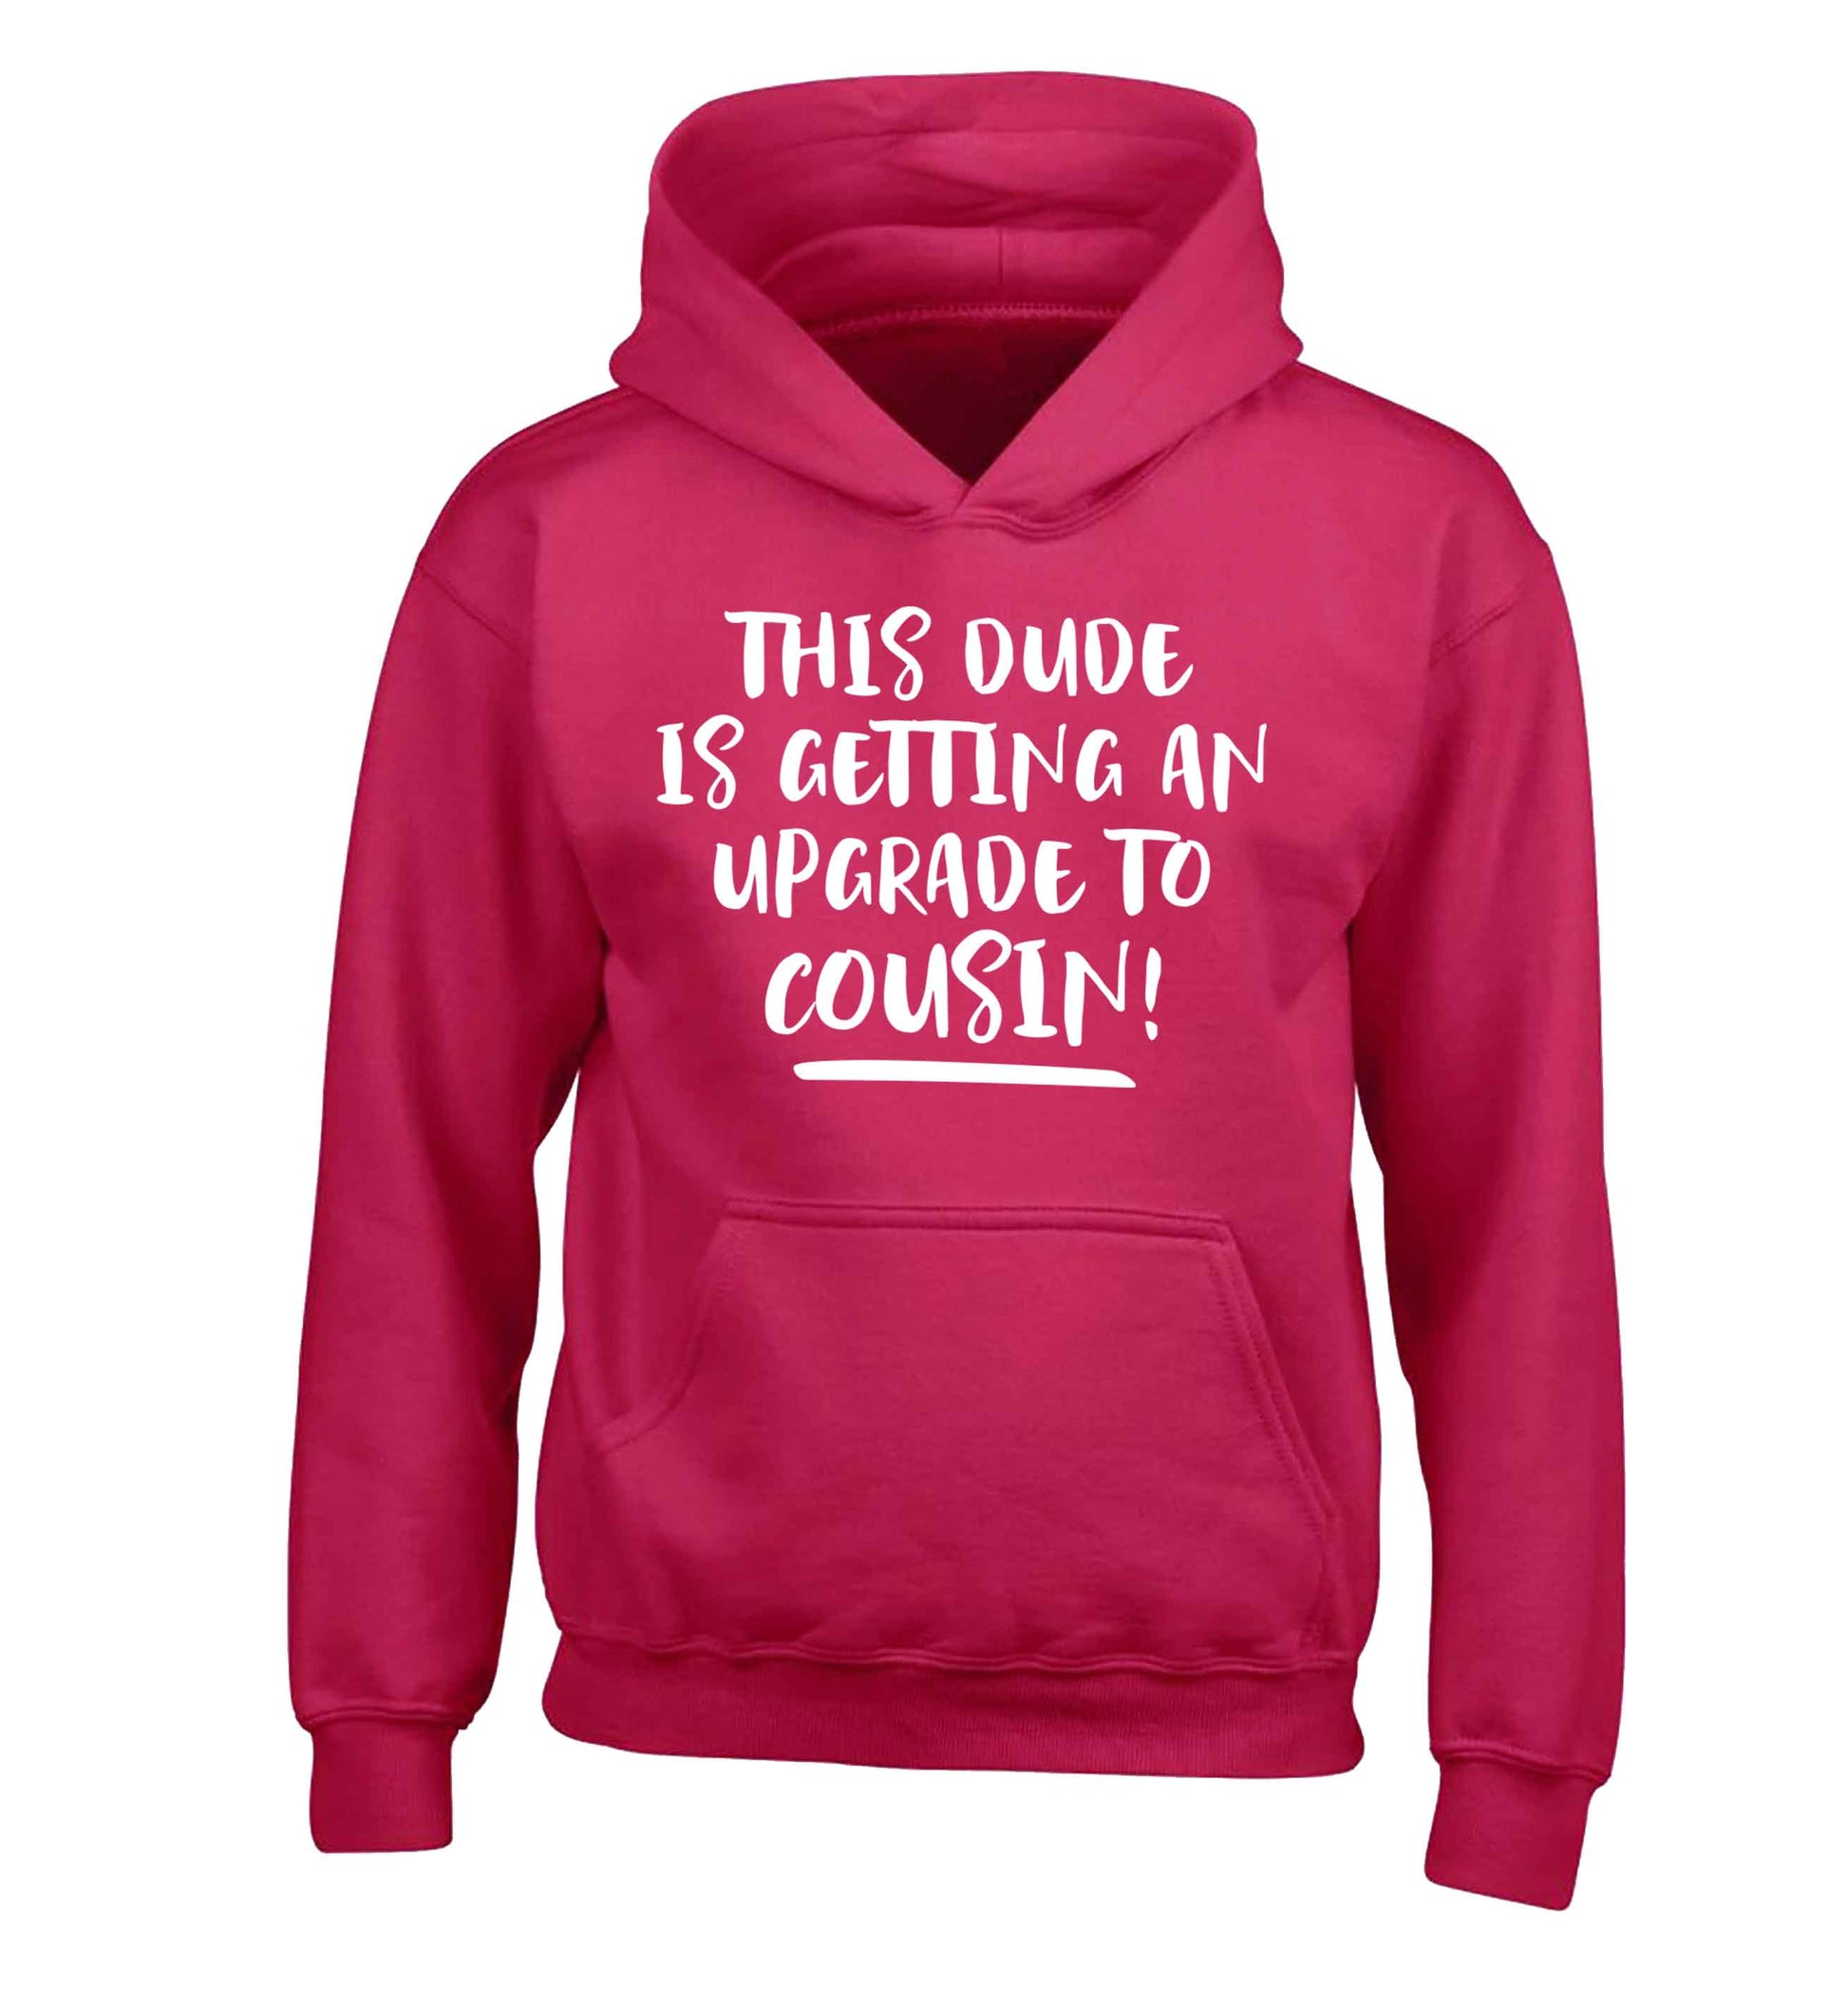 This dude is getting an upgrade to cousin! children's pink hoodie 12-13 Years